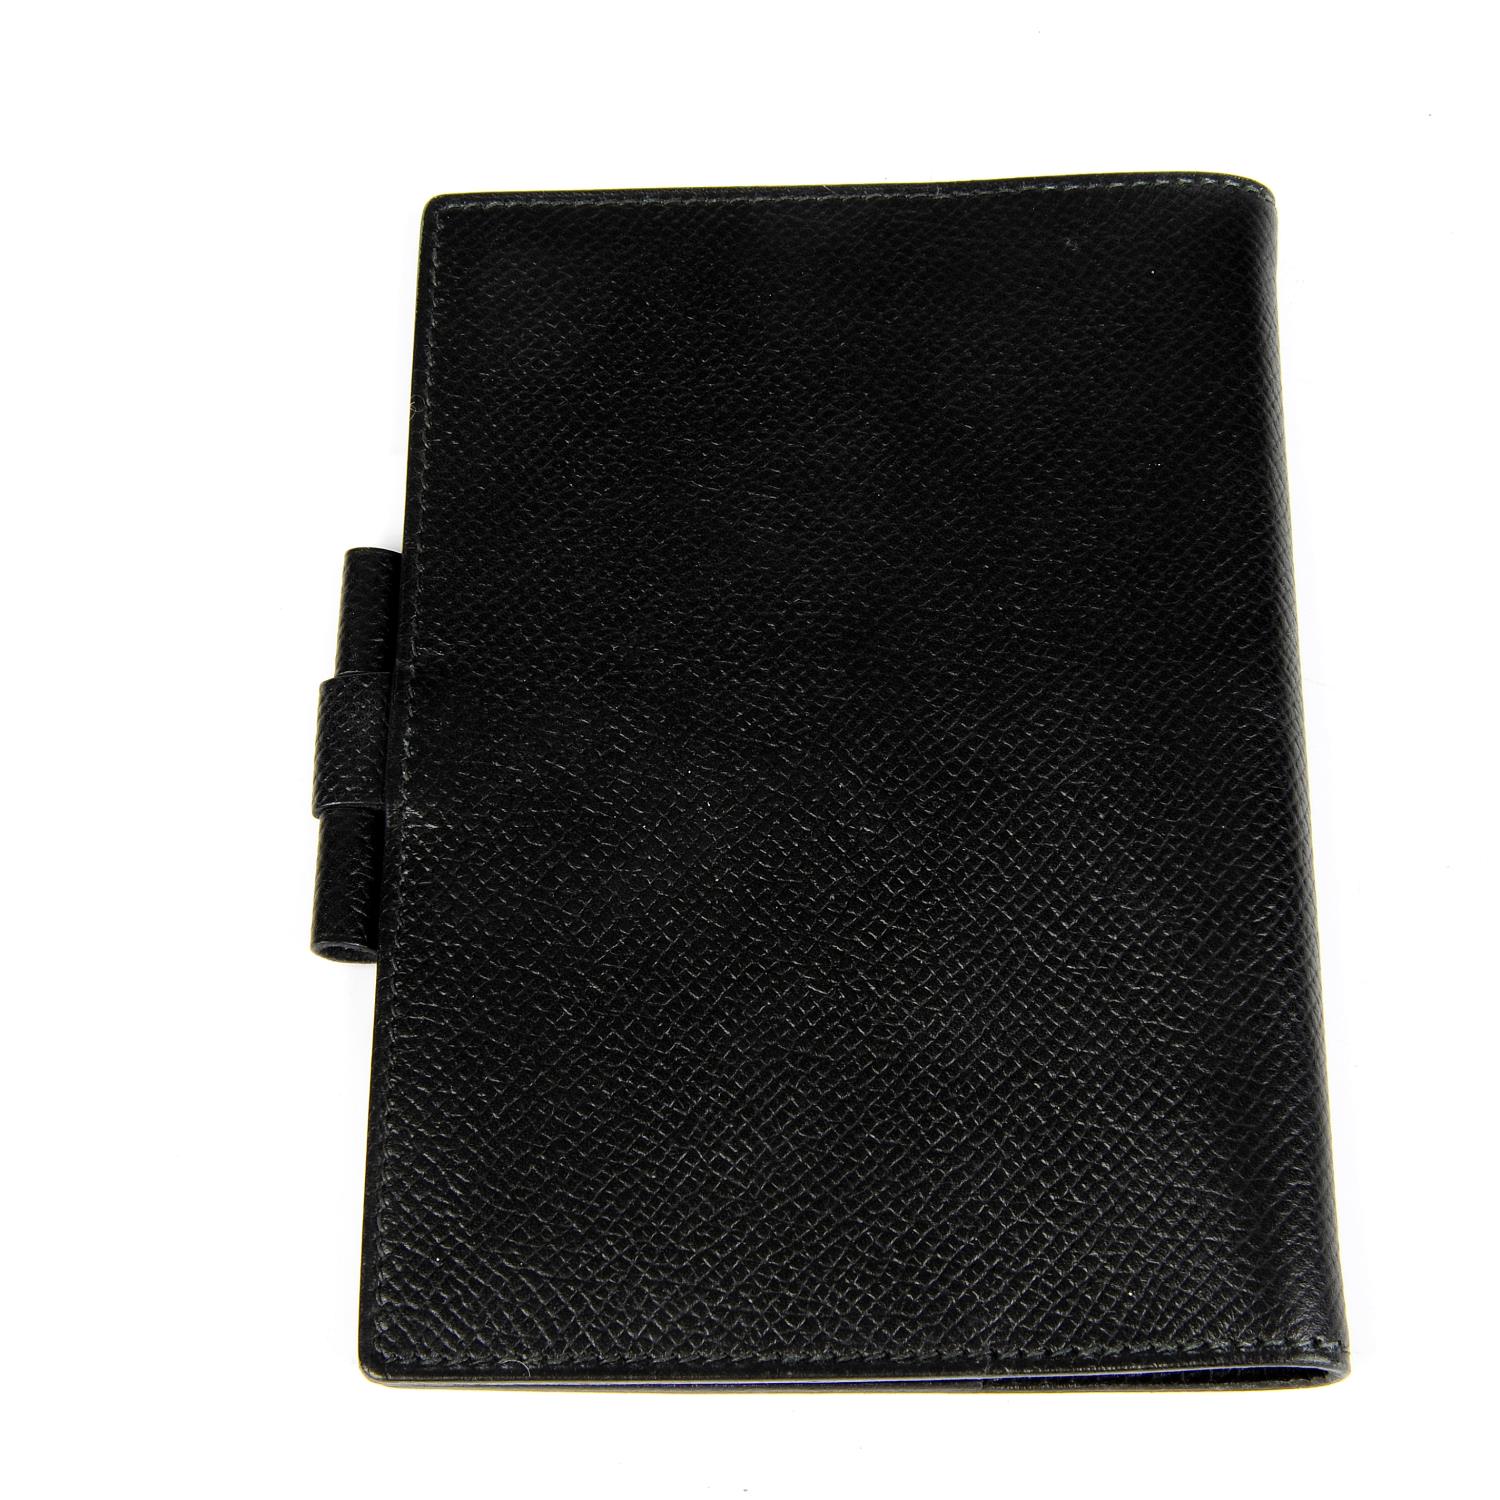 HERMÈS - a small black leather Vision agenda cover. - Image 2 of 3